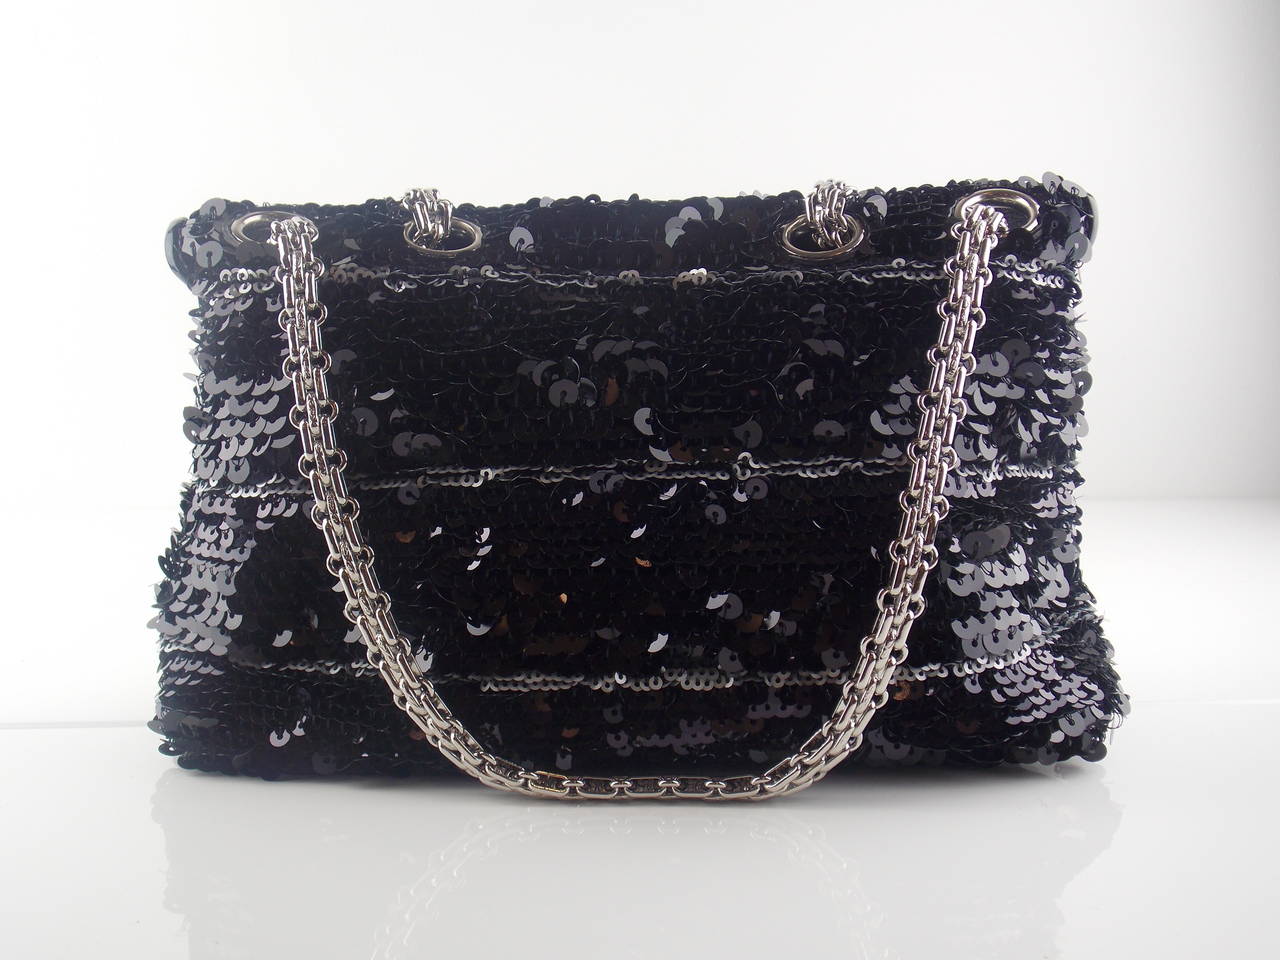 Chanel 'Reissue Embellishment Purse', Black and White Sequin with Silver Hardware and Chain.